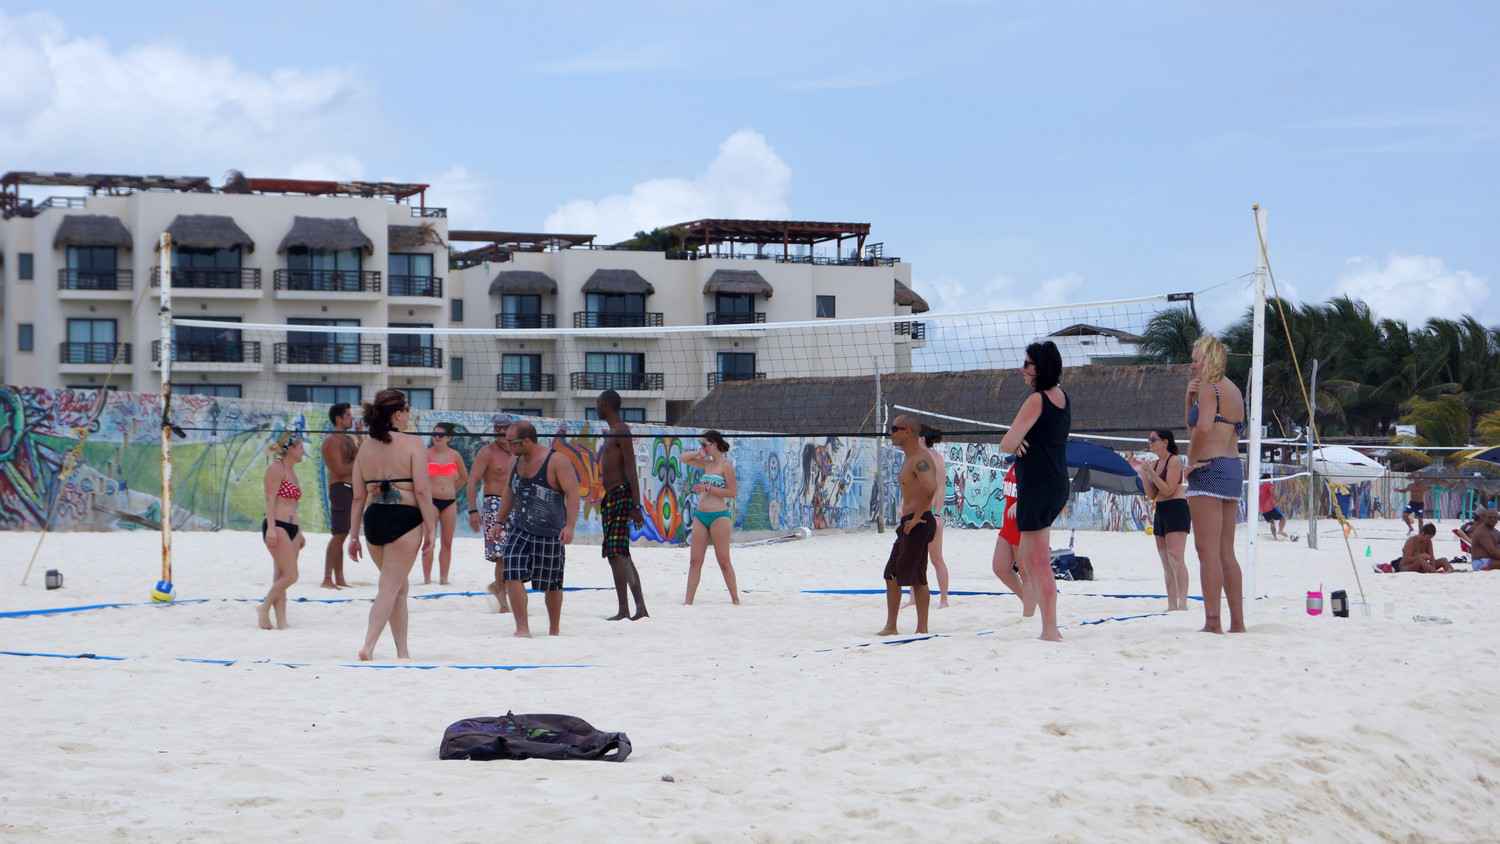 Several people playing beach volleyball in Playa Del Carmen.